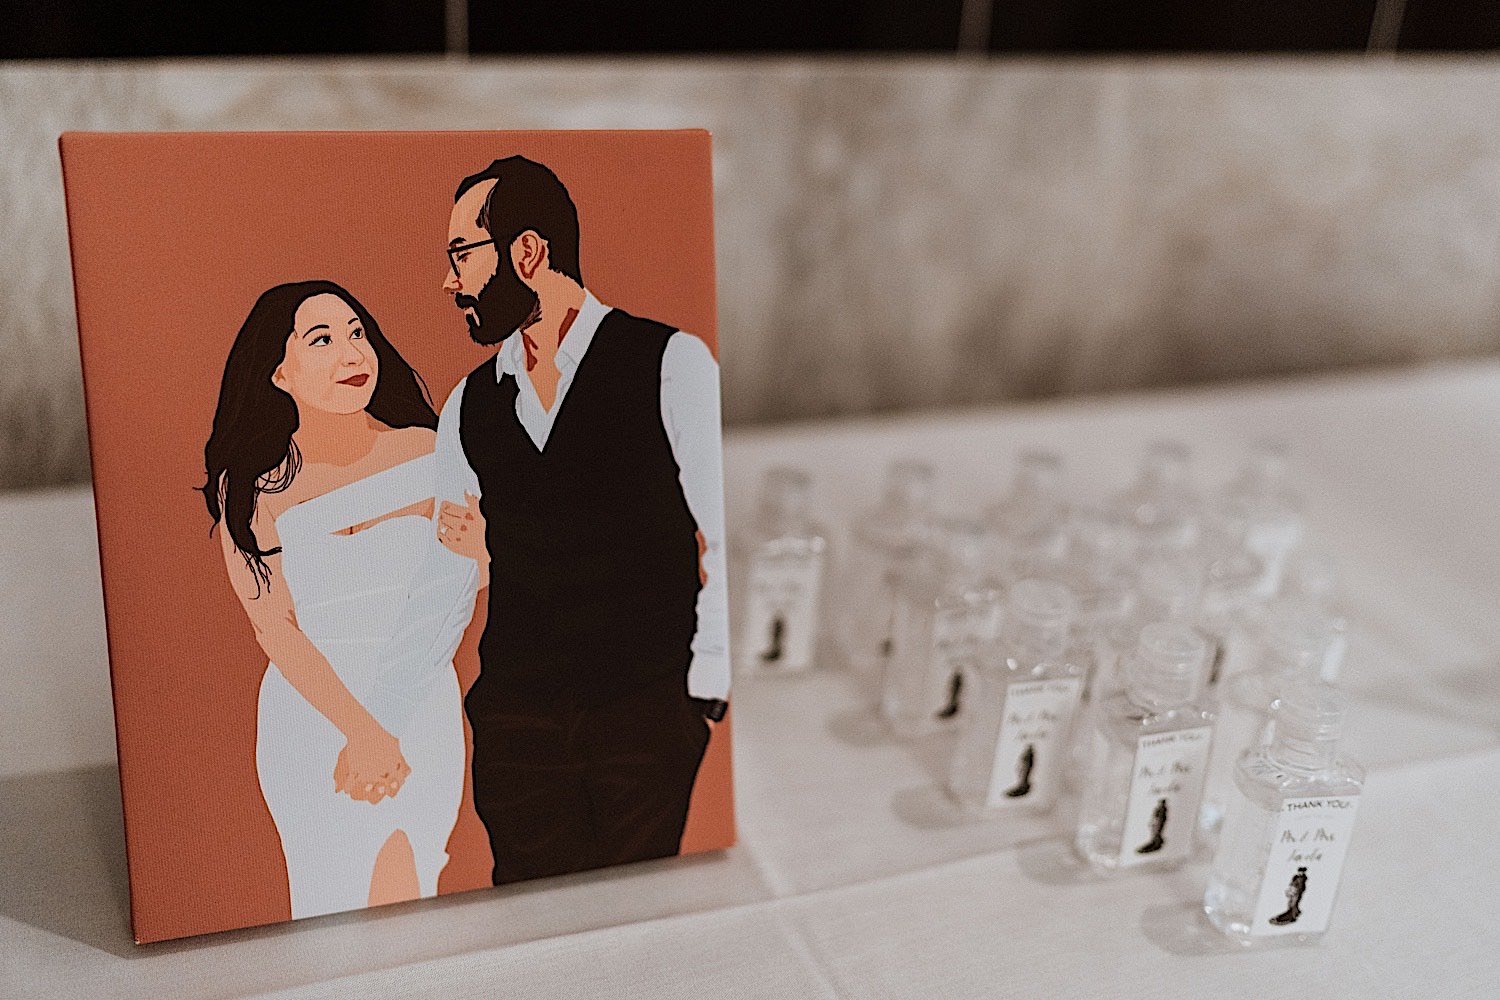 Painting of the bride and groom next to each other with hand sanitizer wedding favors next to the painting